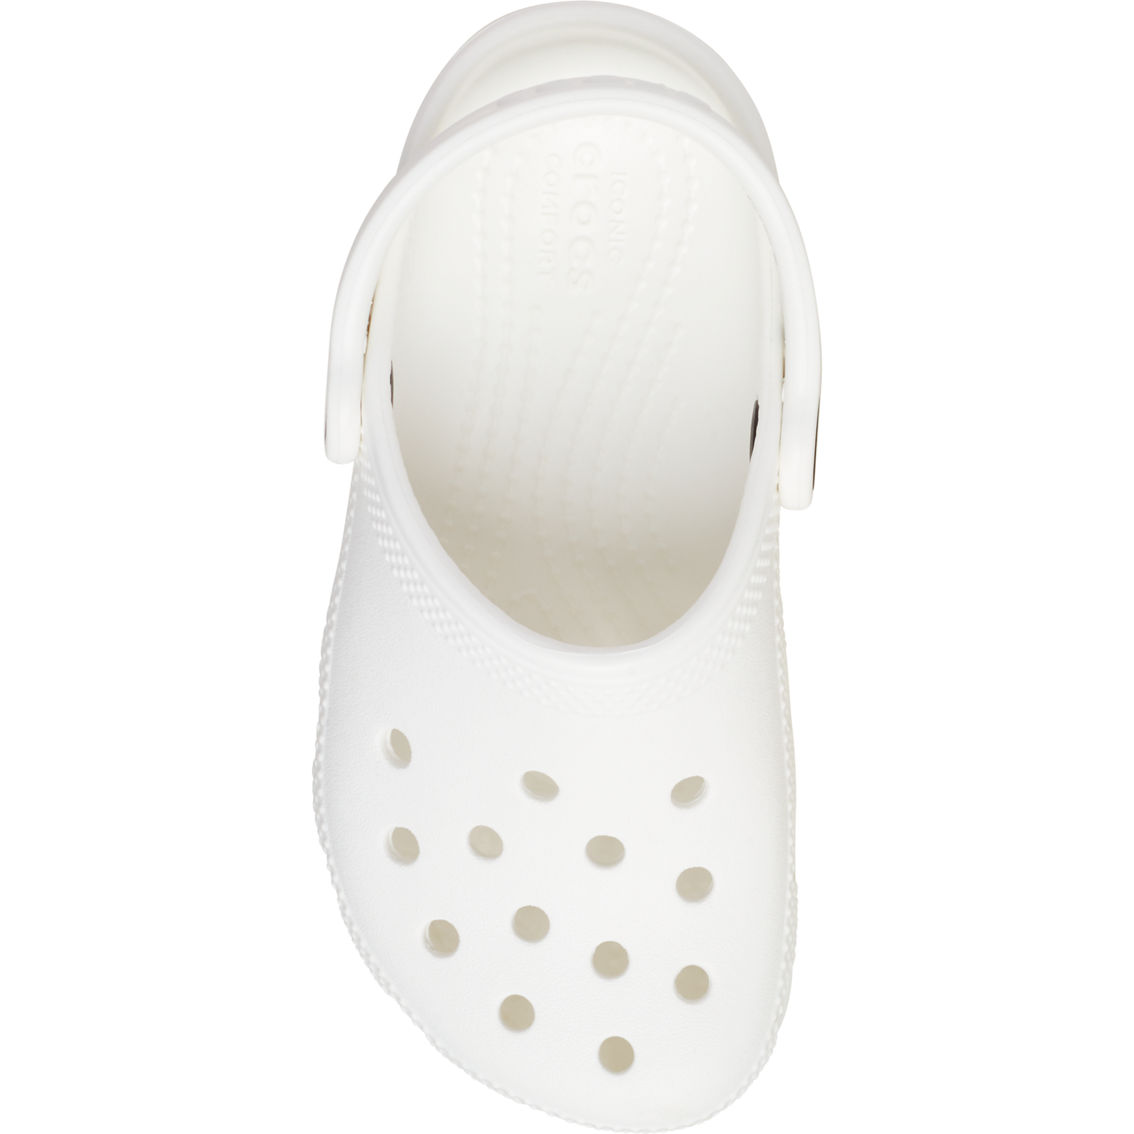 Crocs Toddlers Classic Clogs - Image 3 of 5